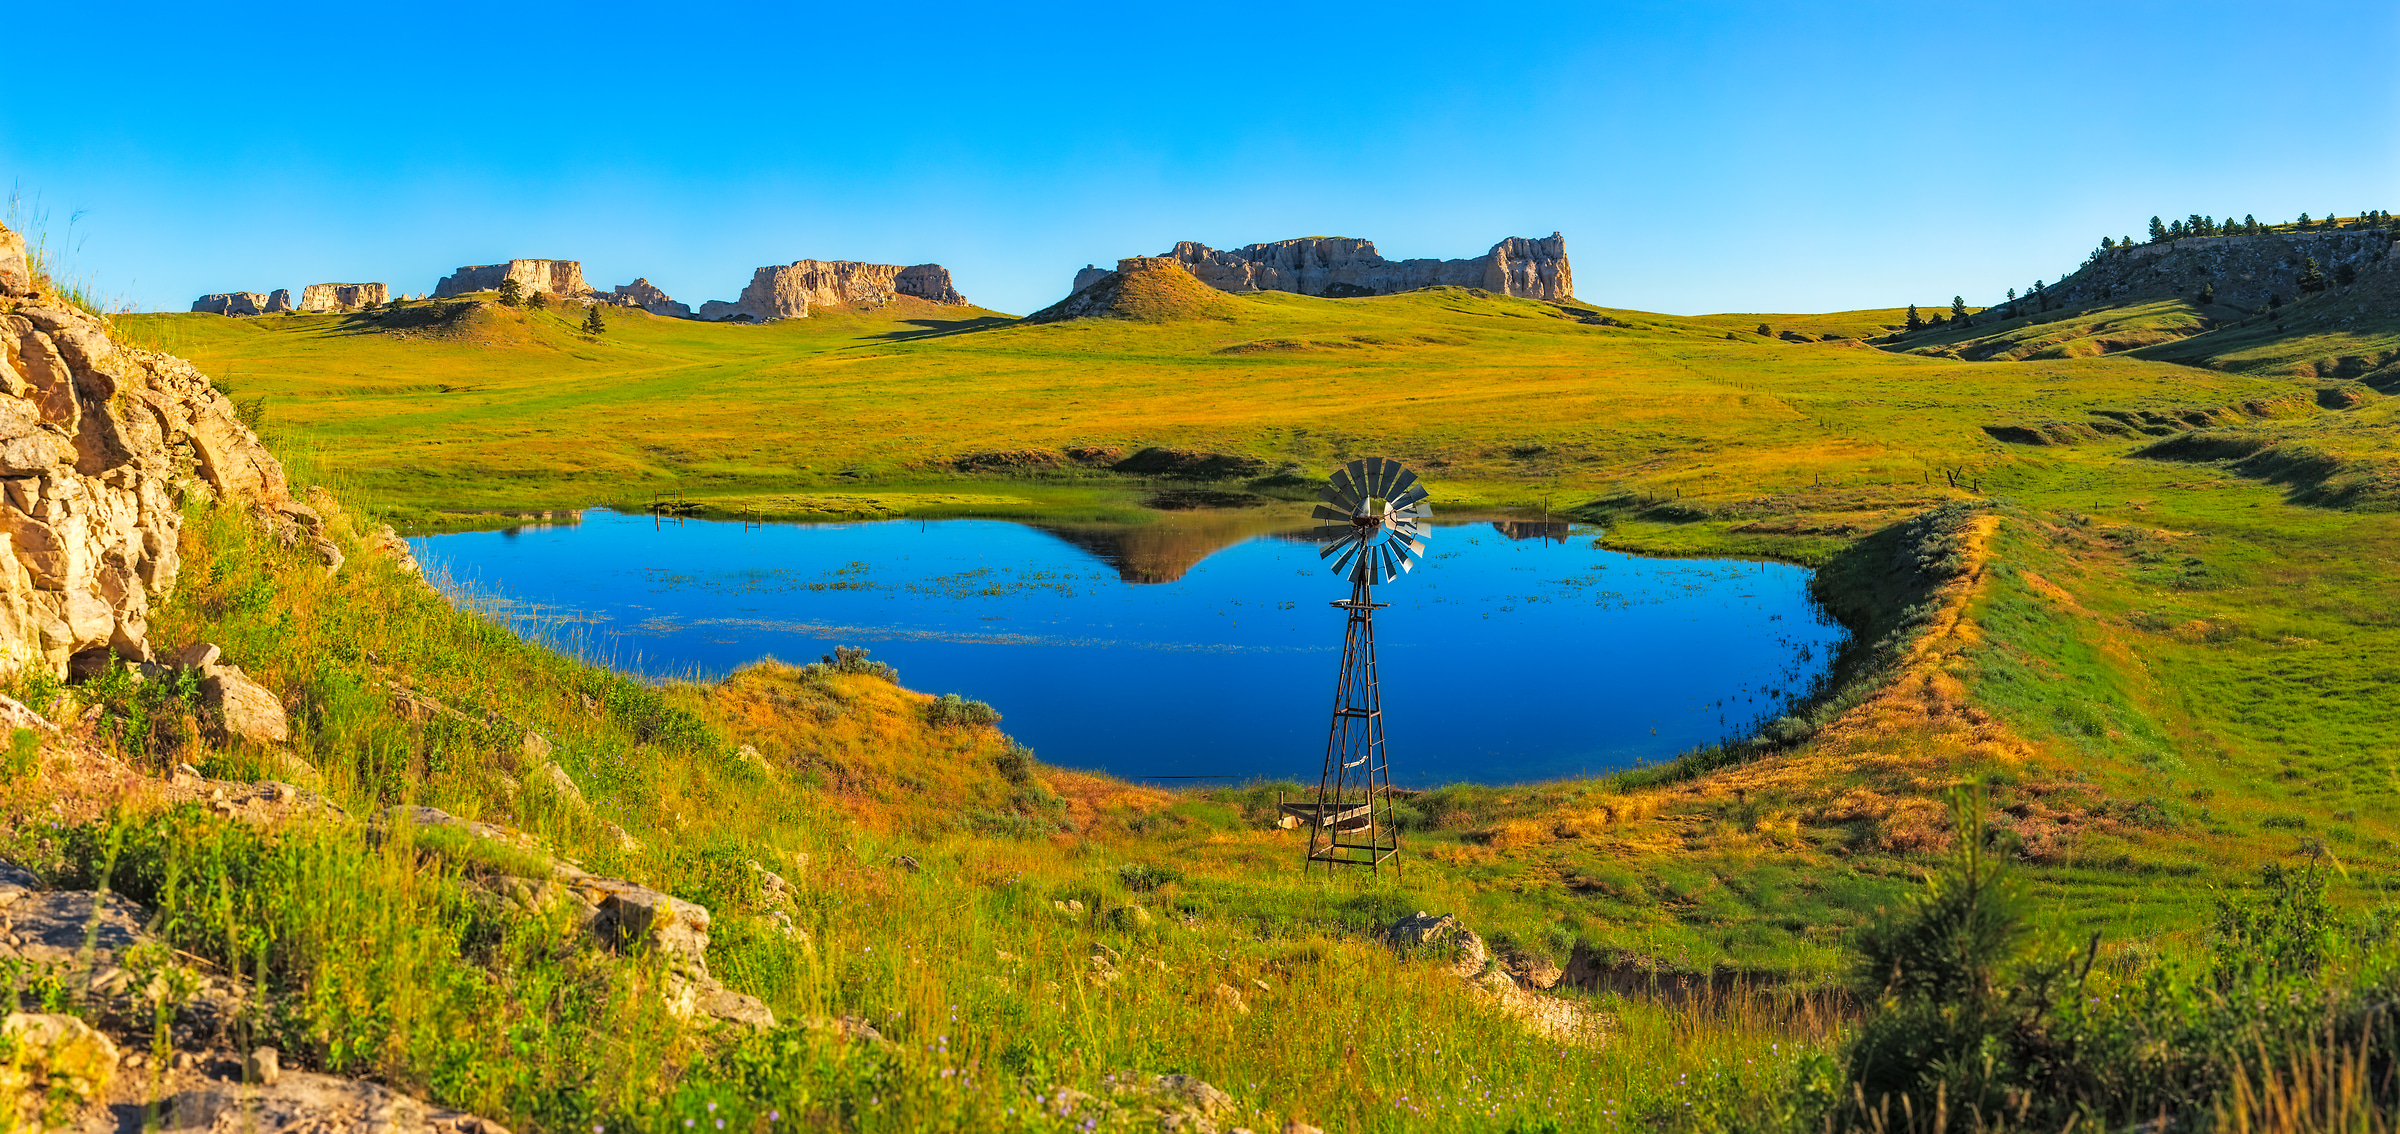 619 megapixels! A very high resolution, large-format VAST photo print of a Wyoming landscape with fields, a pond, and a windmill; photograph created by John Freeman in Keeline, Wyoming